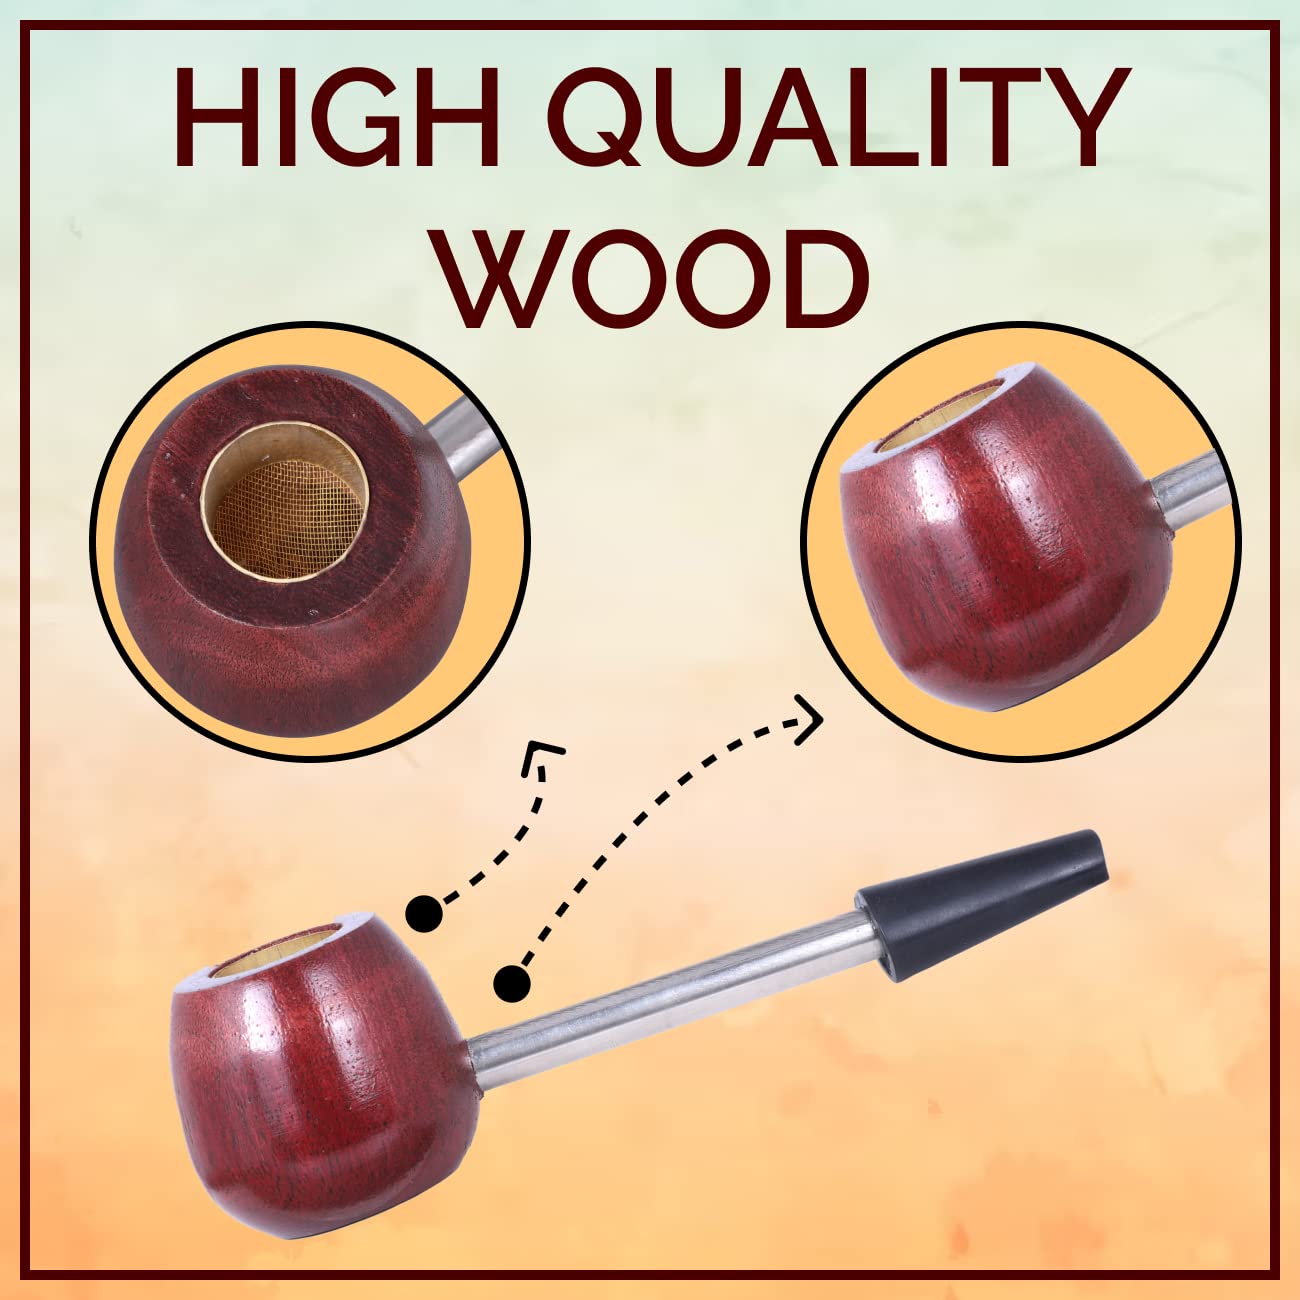 100% Tobacco-Free & Nicotine-Free Smoking Mixture With 100% Natural & Ayurvedic Herbal Smoking Blend 1 Pack (1 oz/ 30g Can) With Wooden Steel Pipe | Helps To Quit Smoking(Smoking Cessation)